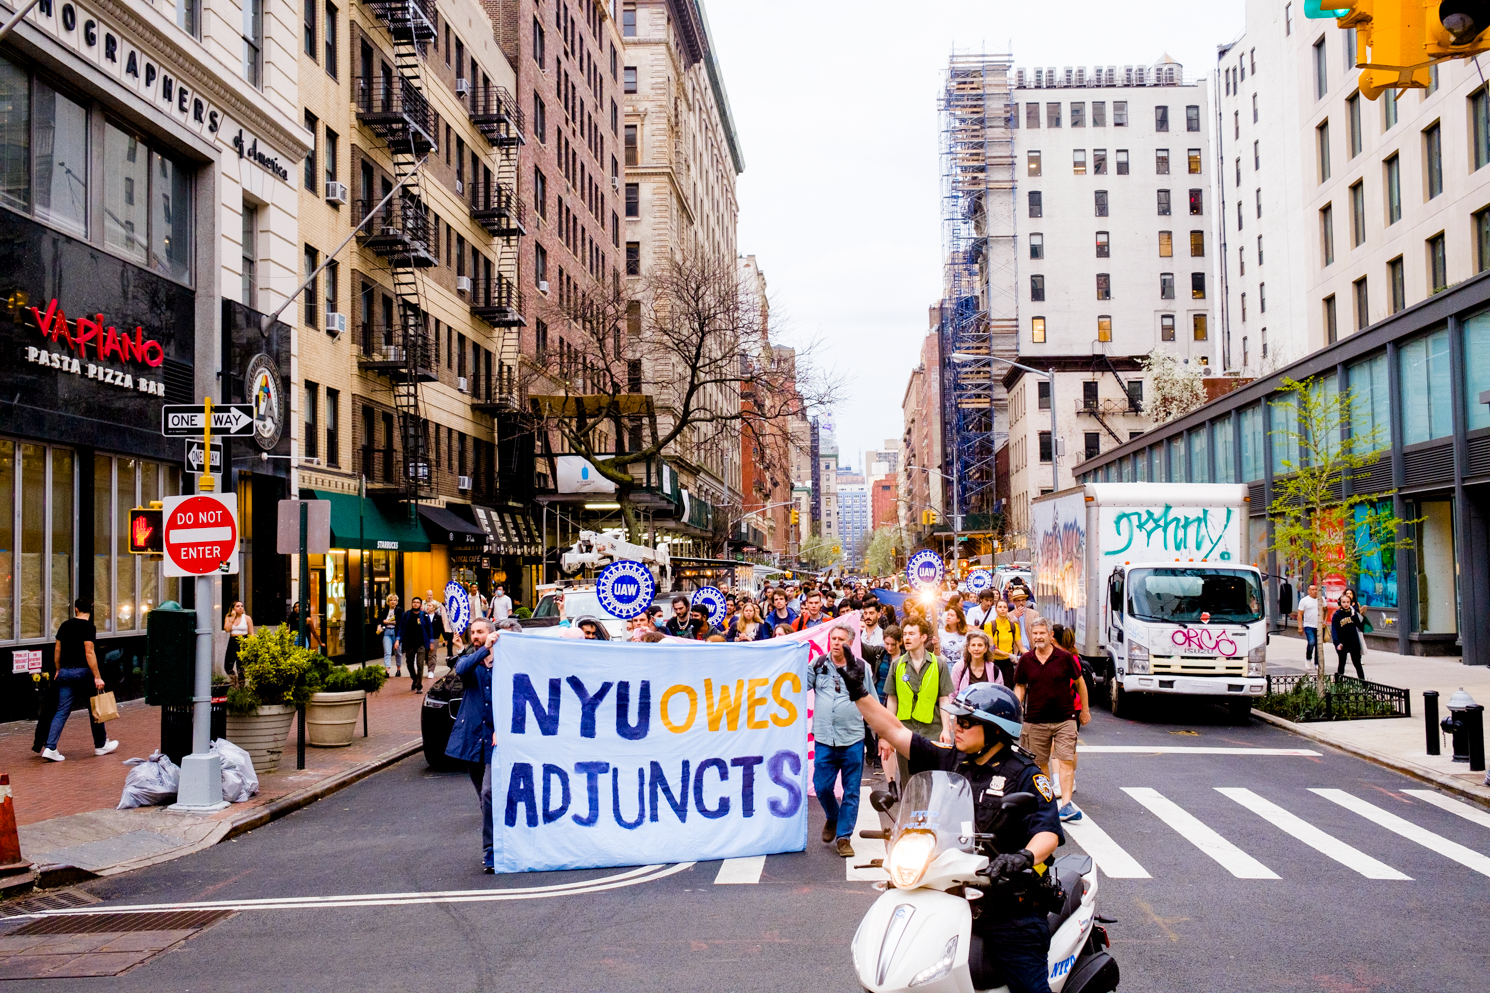 Rally attendees walk down University Place holding a large sign that reads “NYU owes adjuncts.” A police officer on a moped directs traffic in front of the marching protesters.